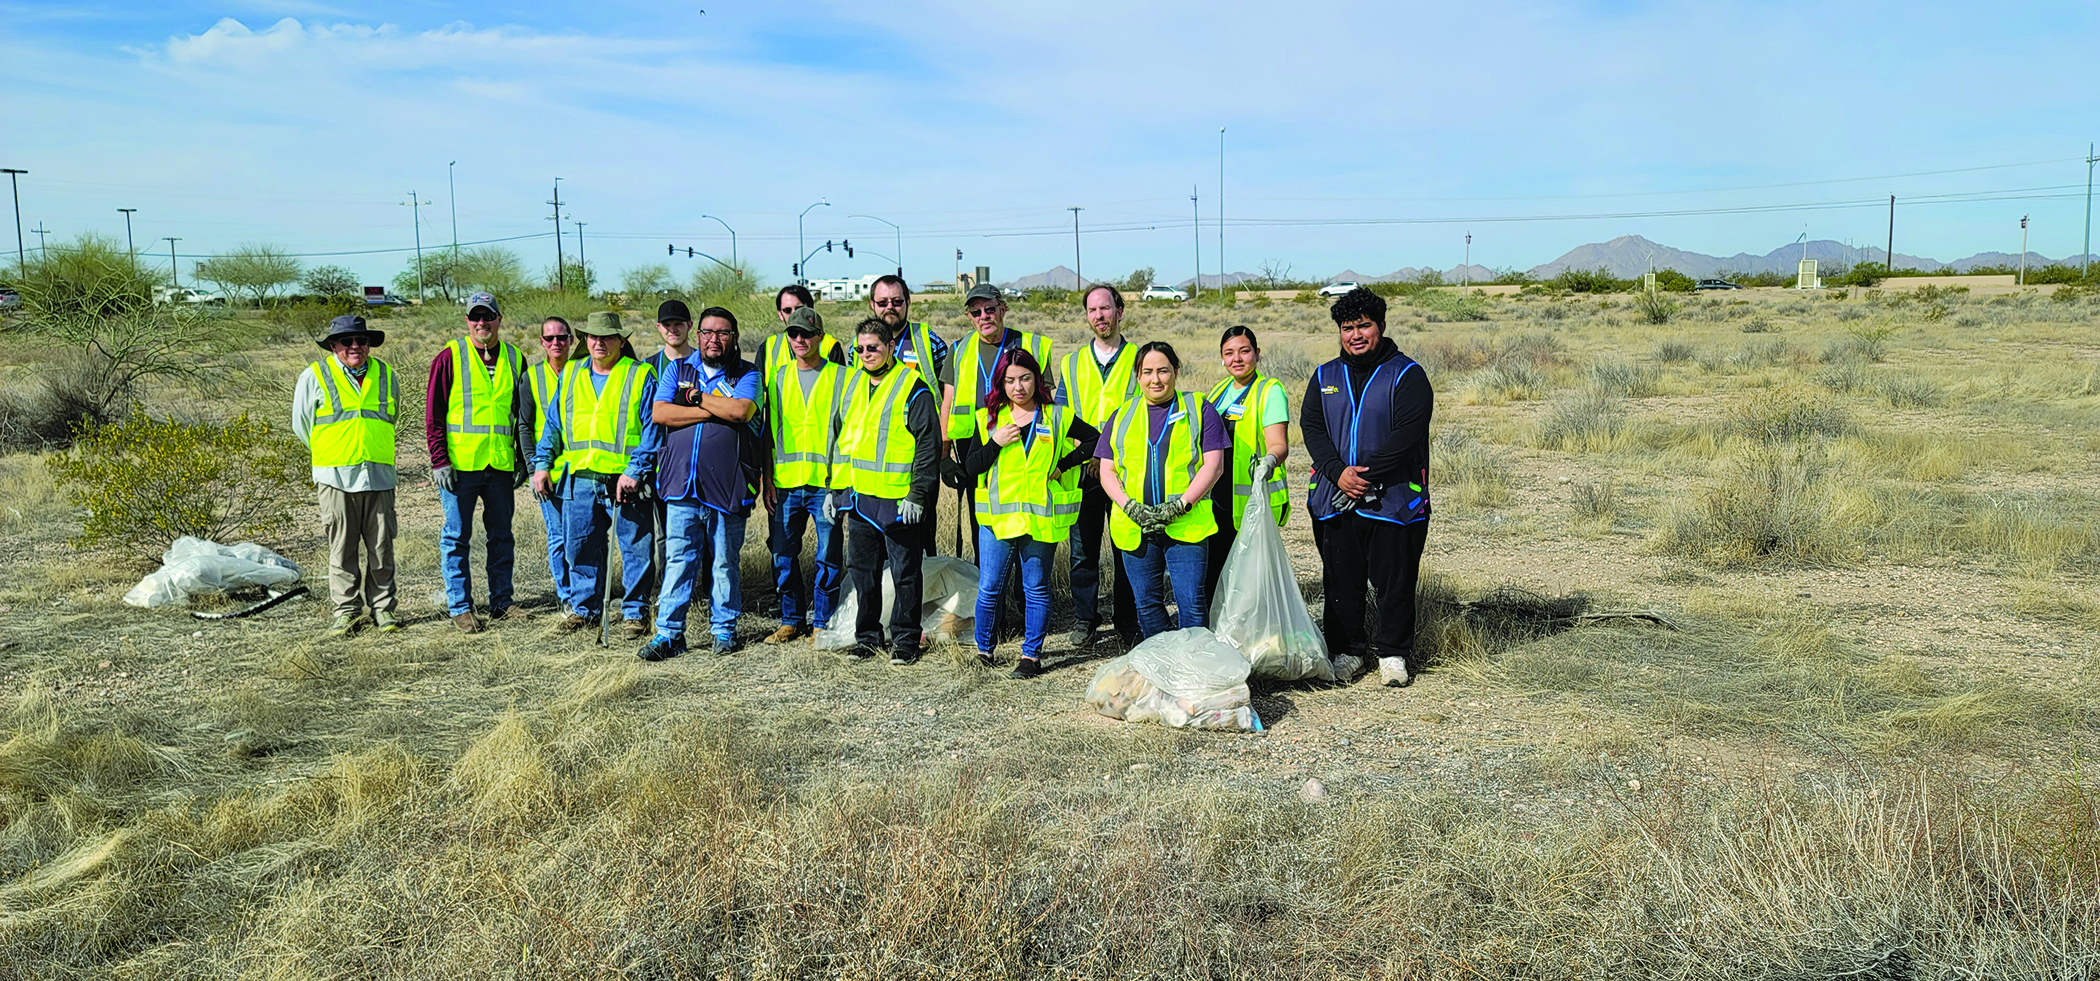 photo of a group of approximately 15 people who are standing in a field, wearing bright yellow caution vests and holding trashbags.